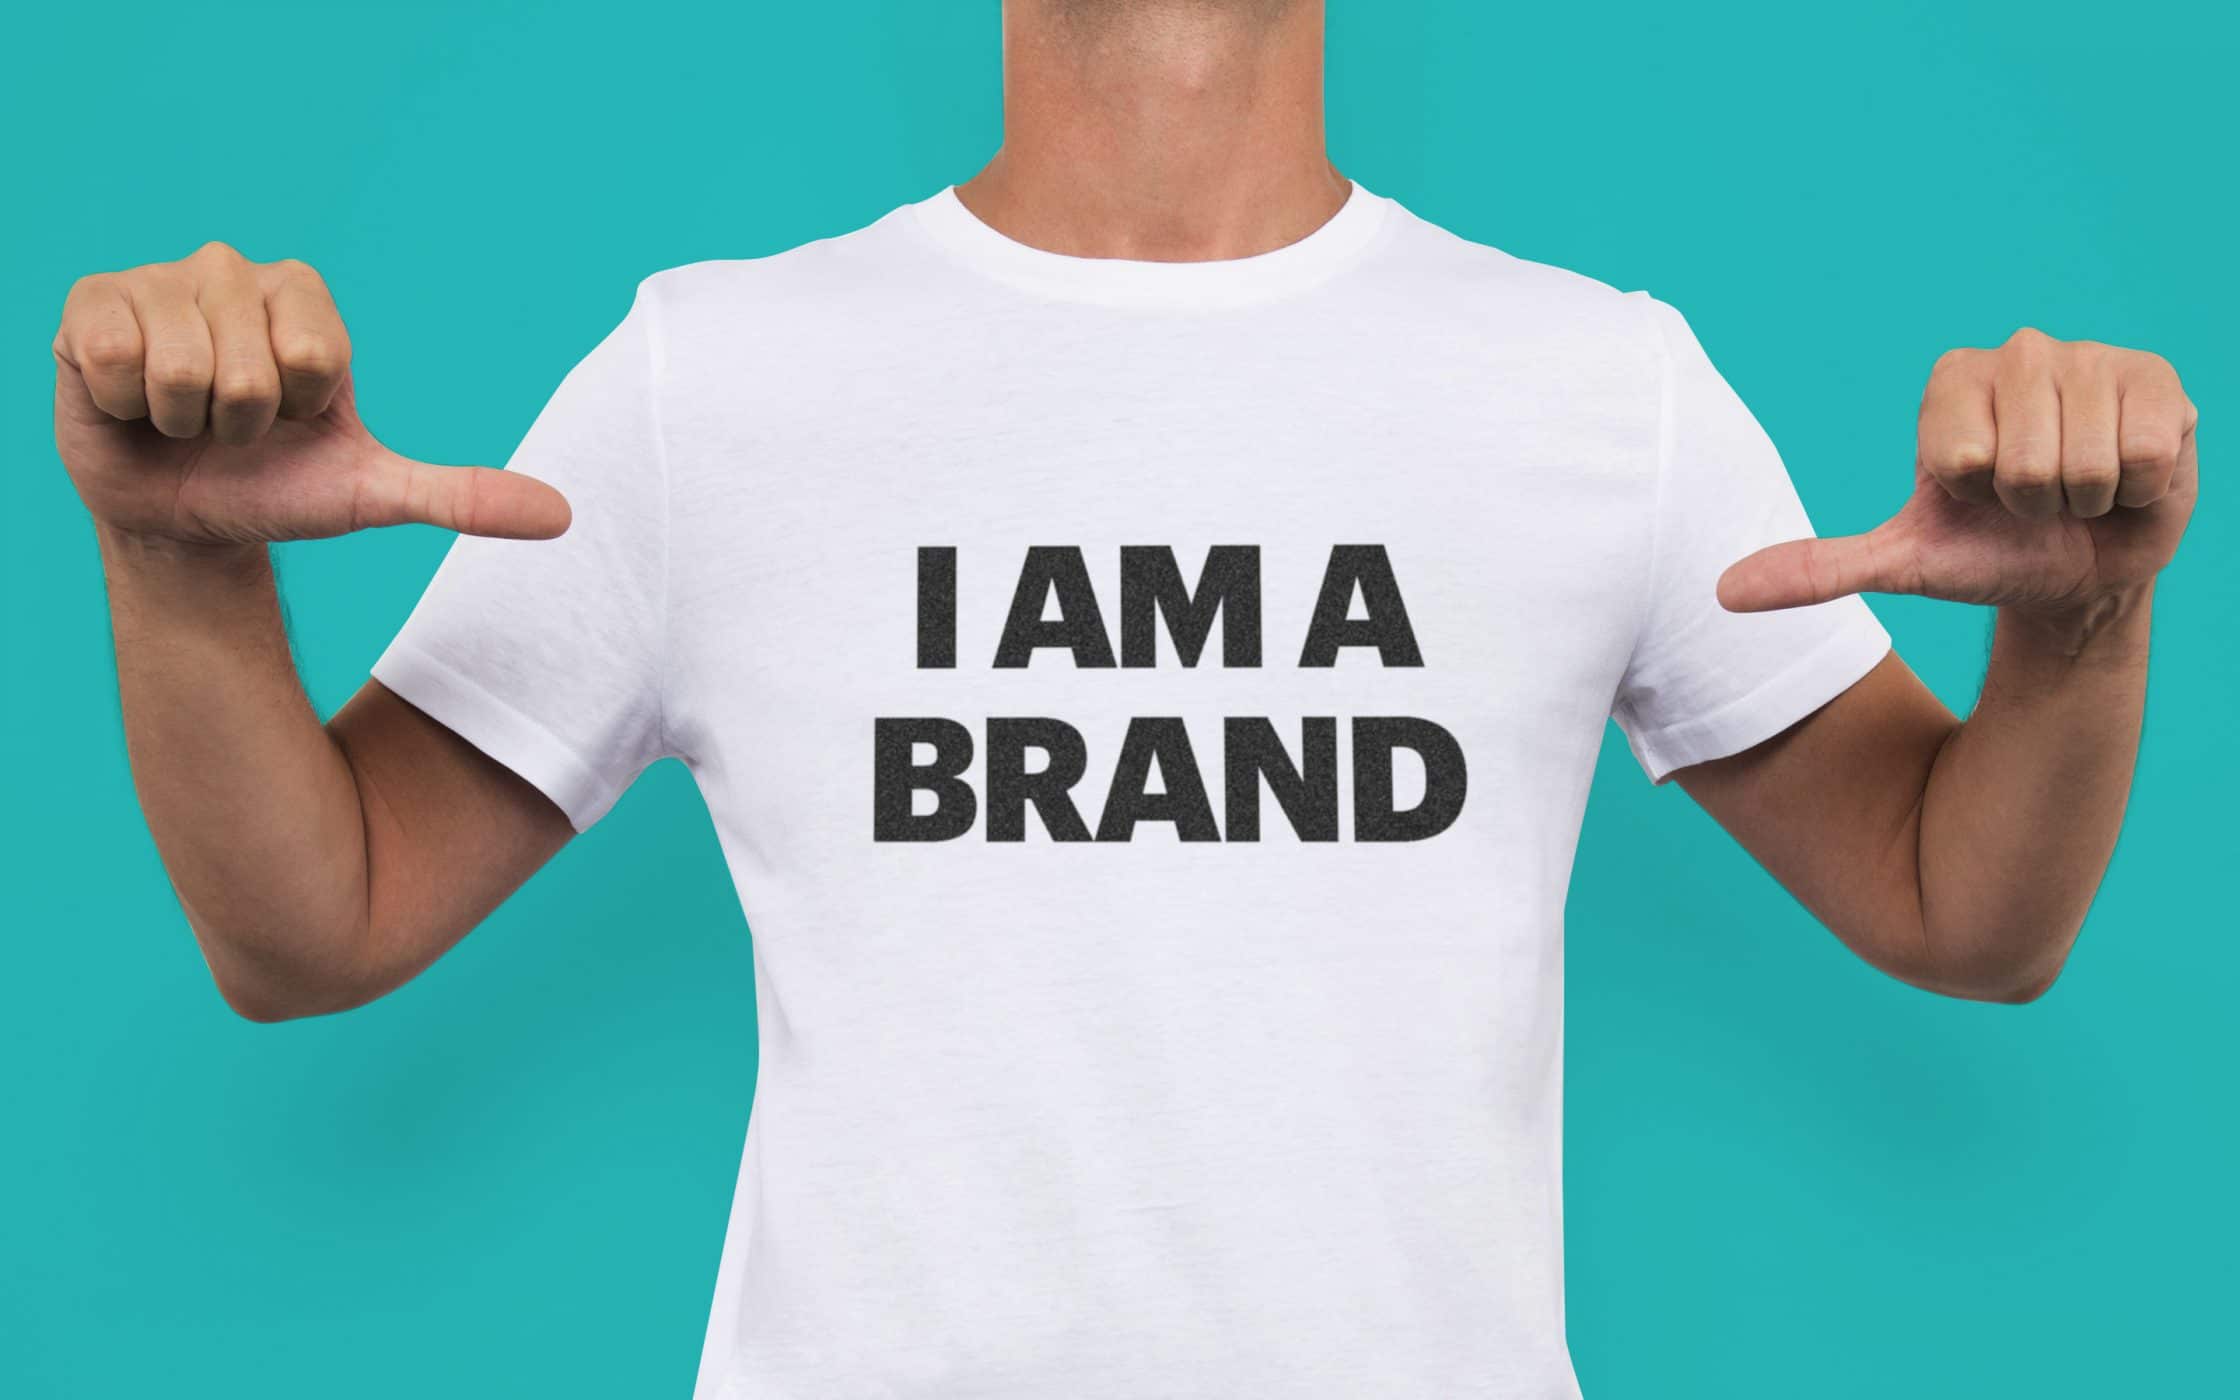 photo of a guy wearing a t-shirt with the text "I am a brand"